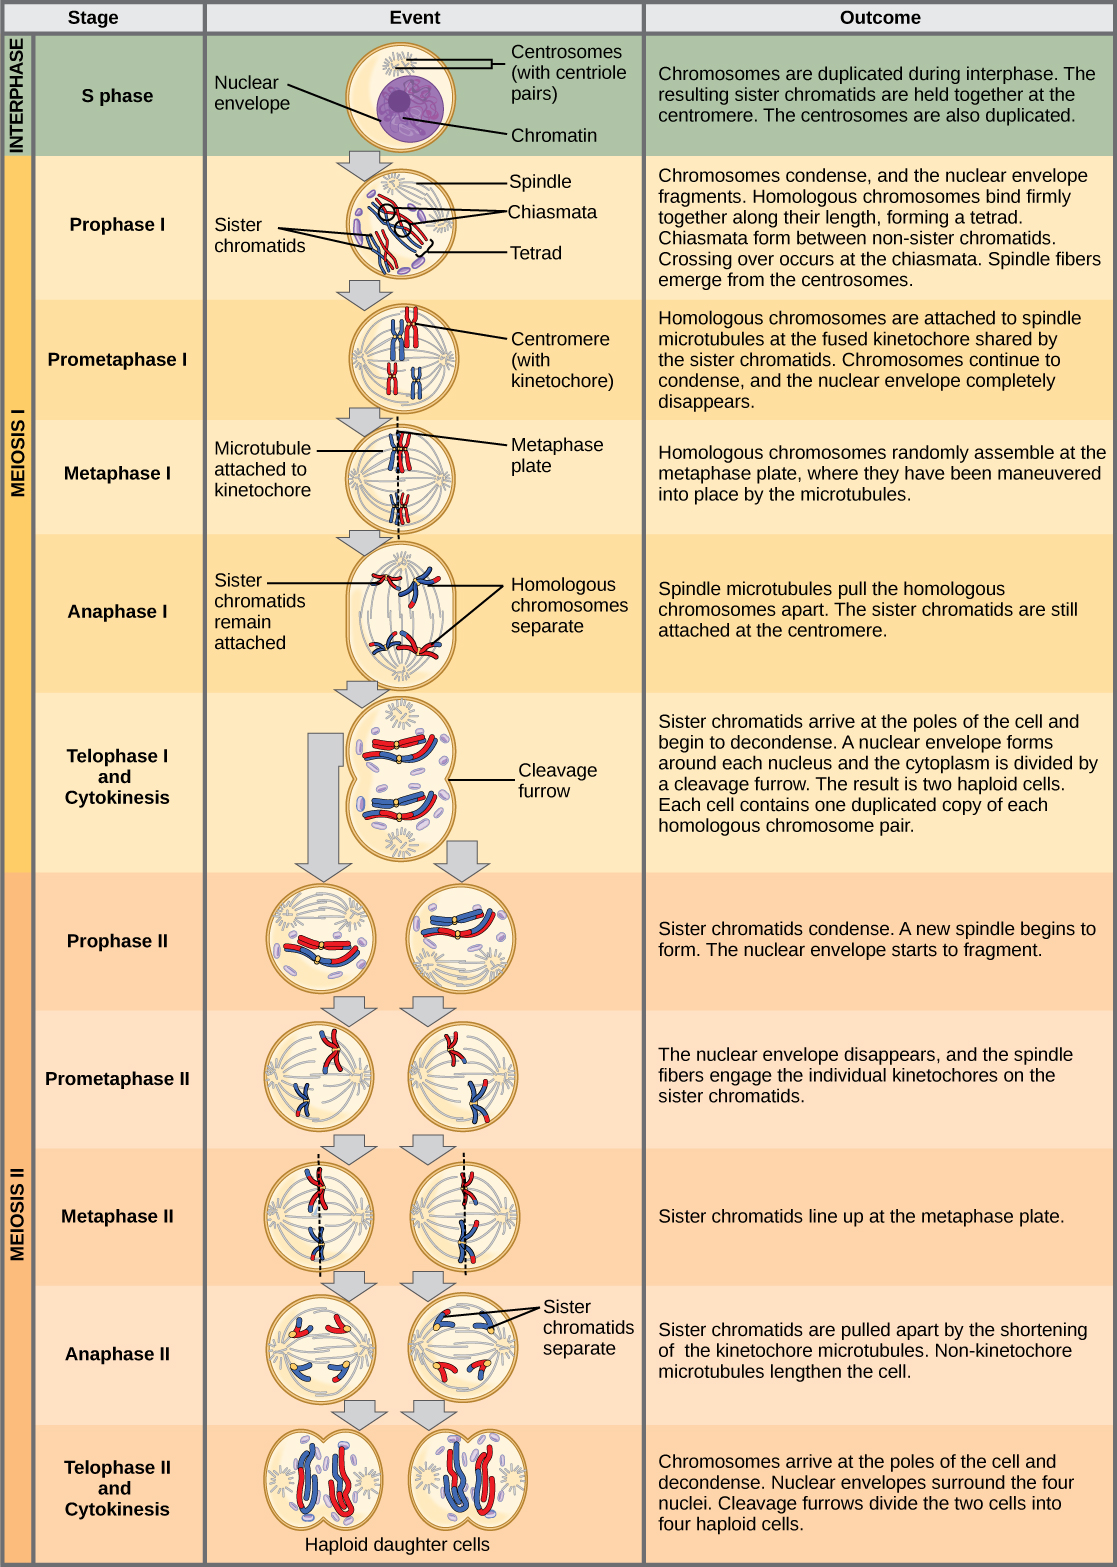 This illustration outlines the stages of meiosis. In interphase, before meiosis begins, the chromosomes are duplicated. Meiosis I then proceeds through several stages. In prophase I, the chromosomes begin to condense and the nuclear envelope fragments. Homologous pairs of chromosomes line up, and chiasmata form between them. Crossing over occurs at the chiasmata. Spindle fibers emerge from the centrosomes. In prometaphase I, homologous chromosomes attach to the spindle microtubules. In metaphase I, homologous chromosomes line up at the metaphase plate. In anaphase I, the spindle microtubules pull the homologous pairs of chromosomes apart. In telophase I and cytokinesis, the sister chromatids arrive at the poles of the cell and begin to decondense. The nuclear envelope begins to form again, and cell division occurs. Meiosis II then proceeds through several stages. In prophase II, the sister chromatids condense and the nuclear envelope fragments. A new spindle begins to form. In prometaphase II, the sister chromatids become attached to the kinetochore. In metaphase II, the sister chromatids line up at the metaphase plate. In anaphase II, the sister chromatids are pulled apart by the shortening spindles. In telophase II and cytokinesis, the nuclear envelope forms again and cell division occurs, resulting in four haploid daughter cells.